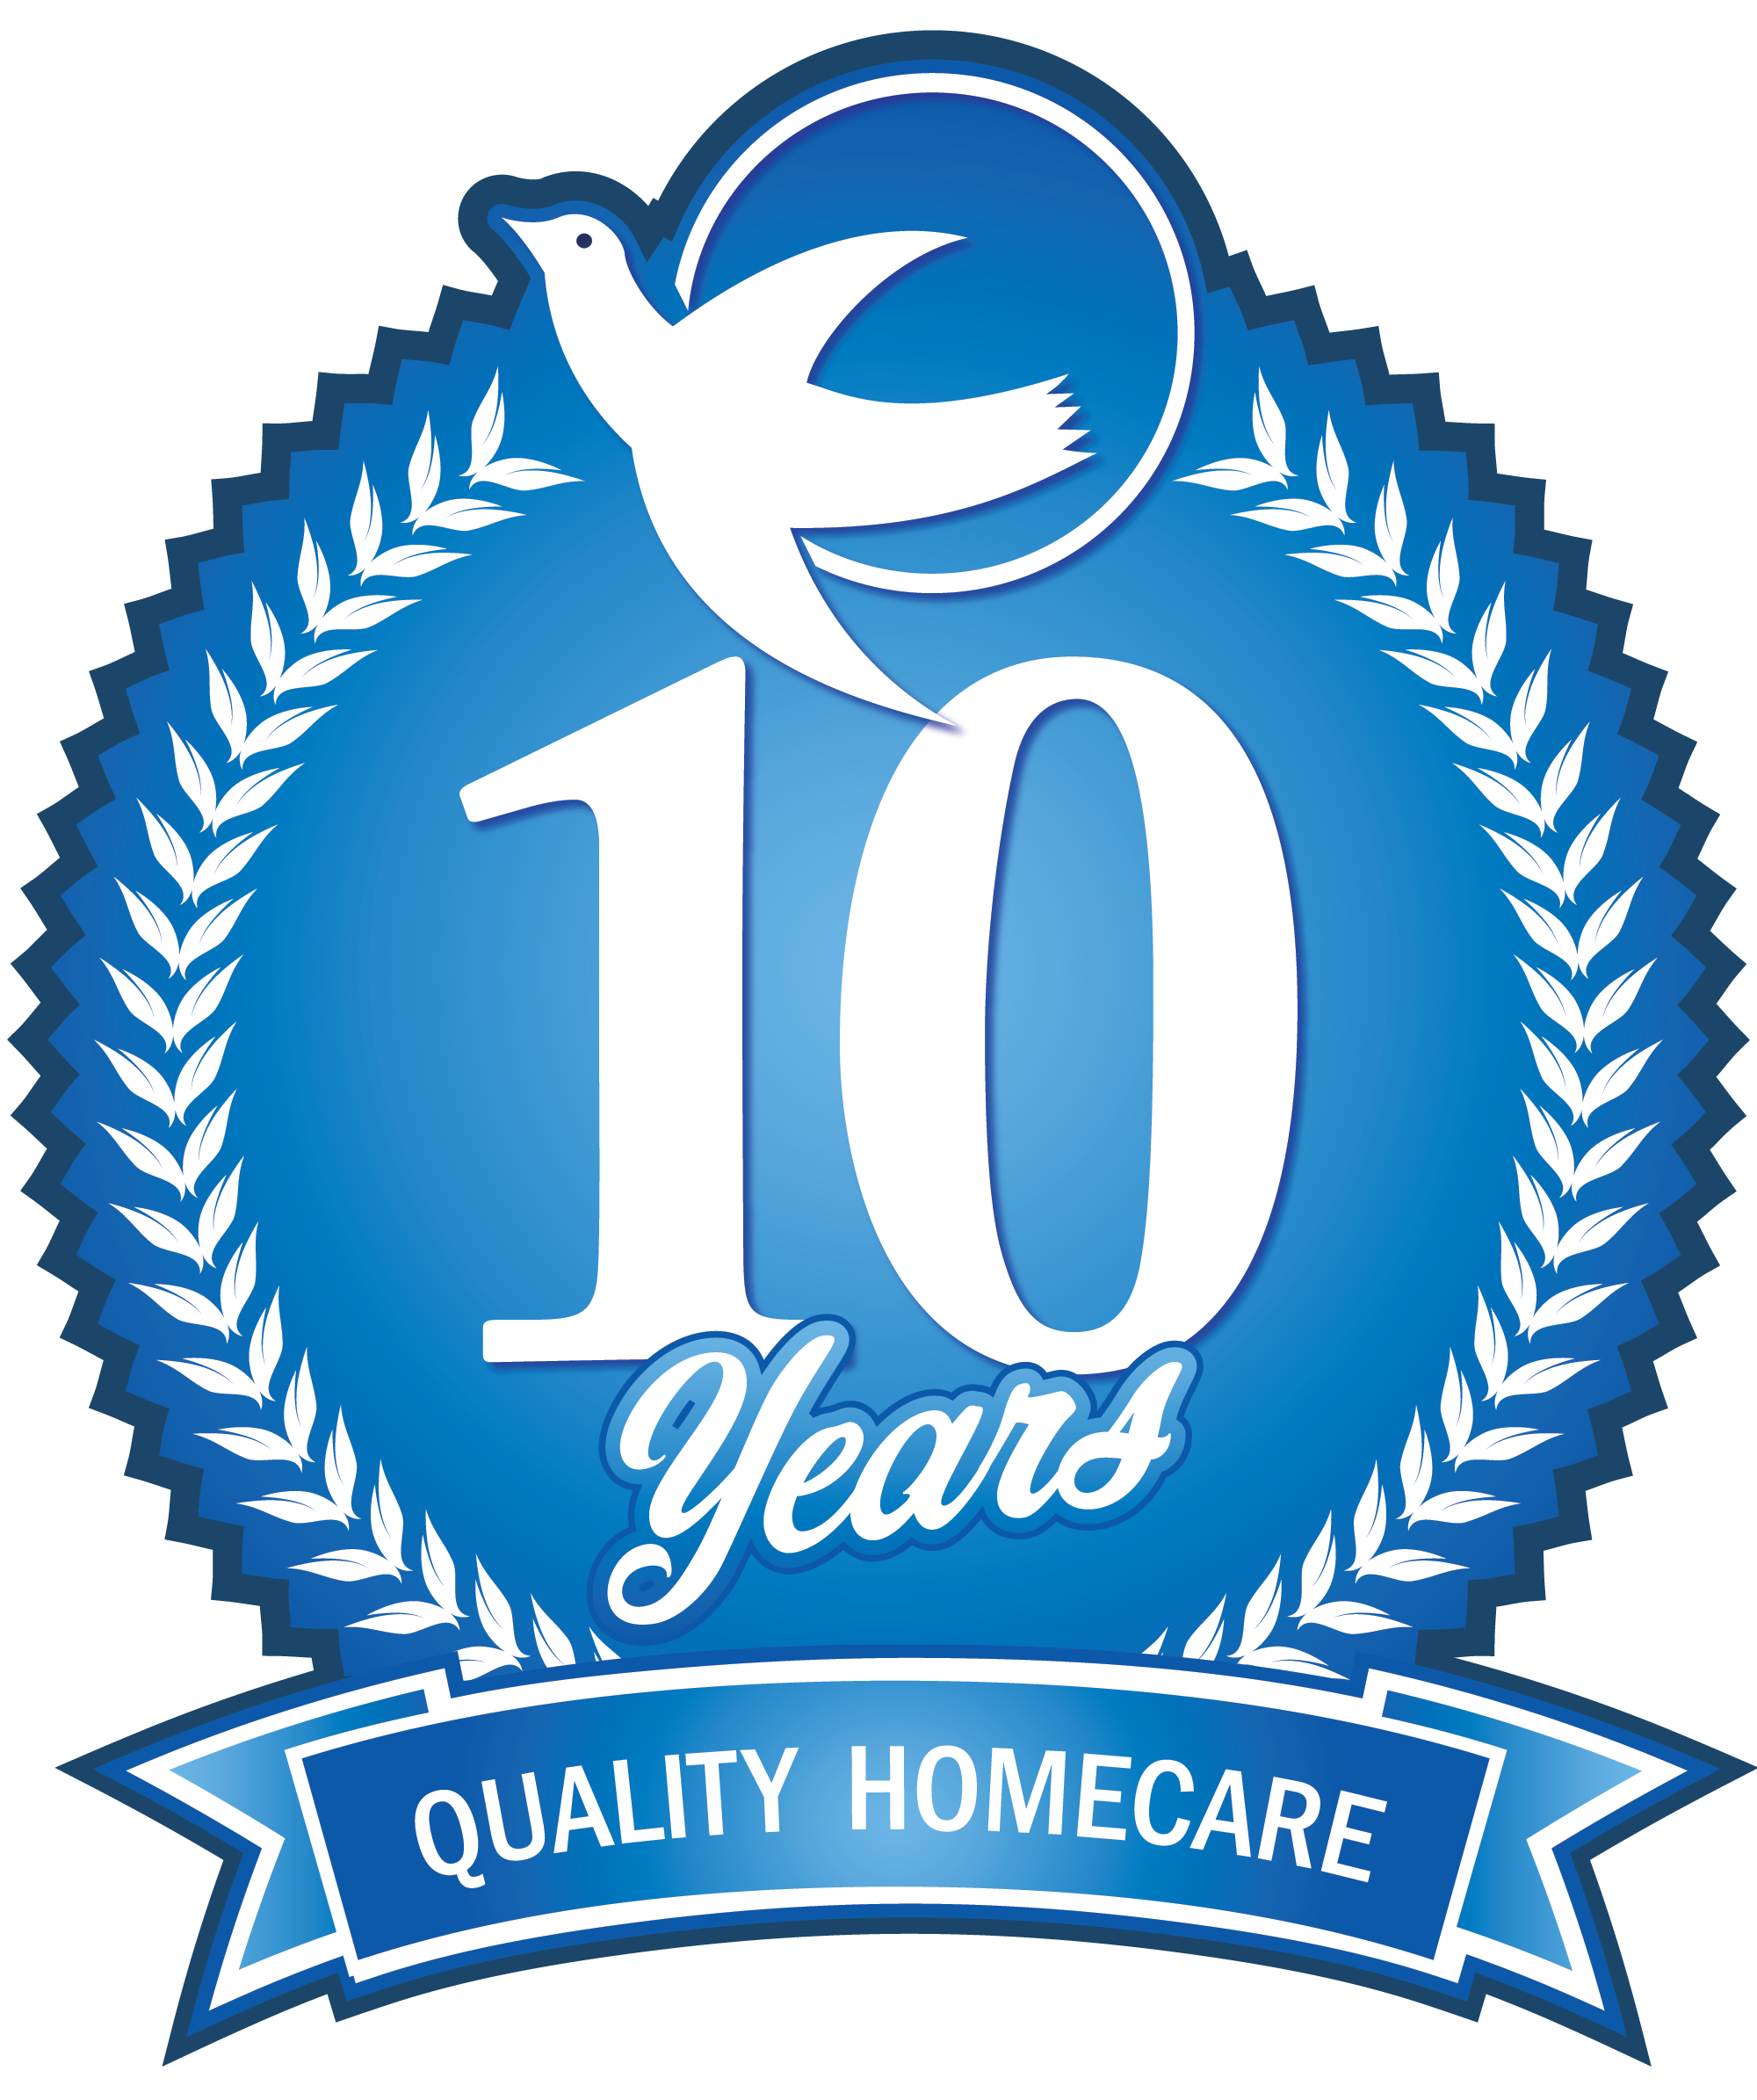 10 years of quality home care.